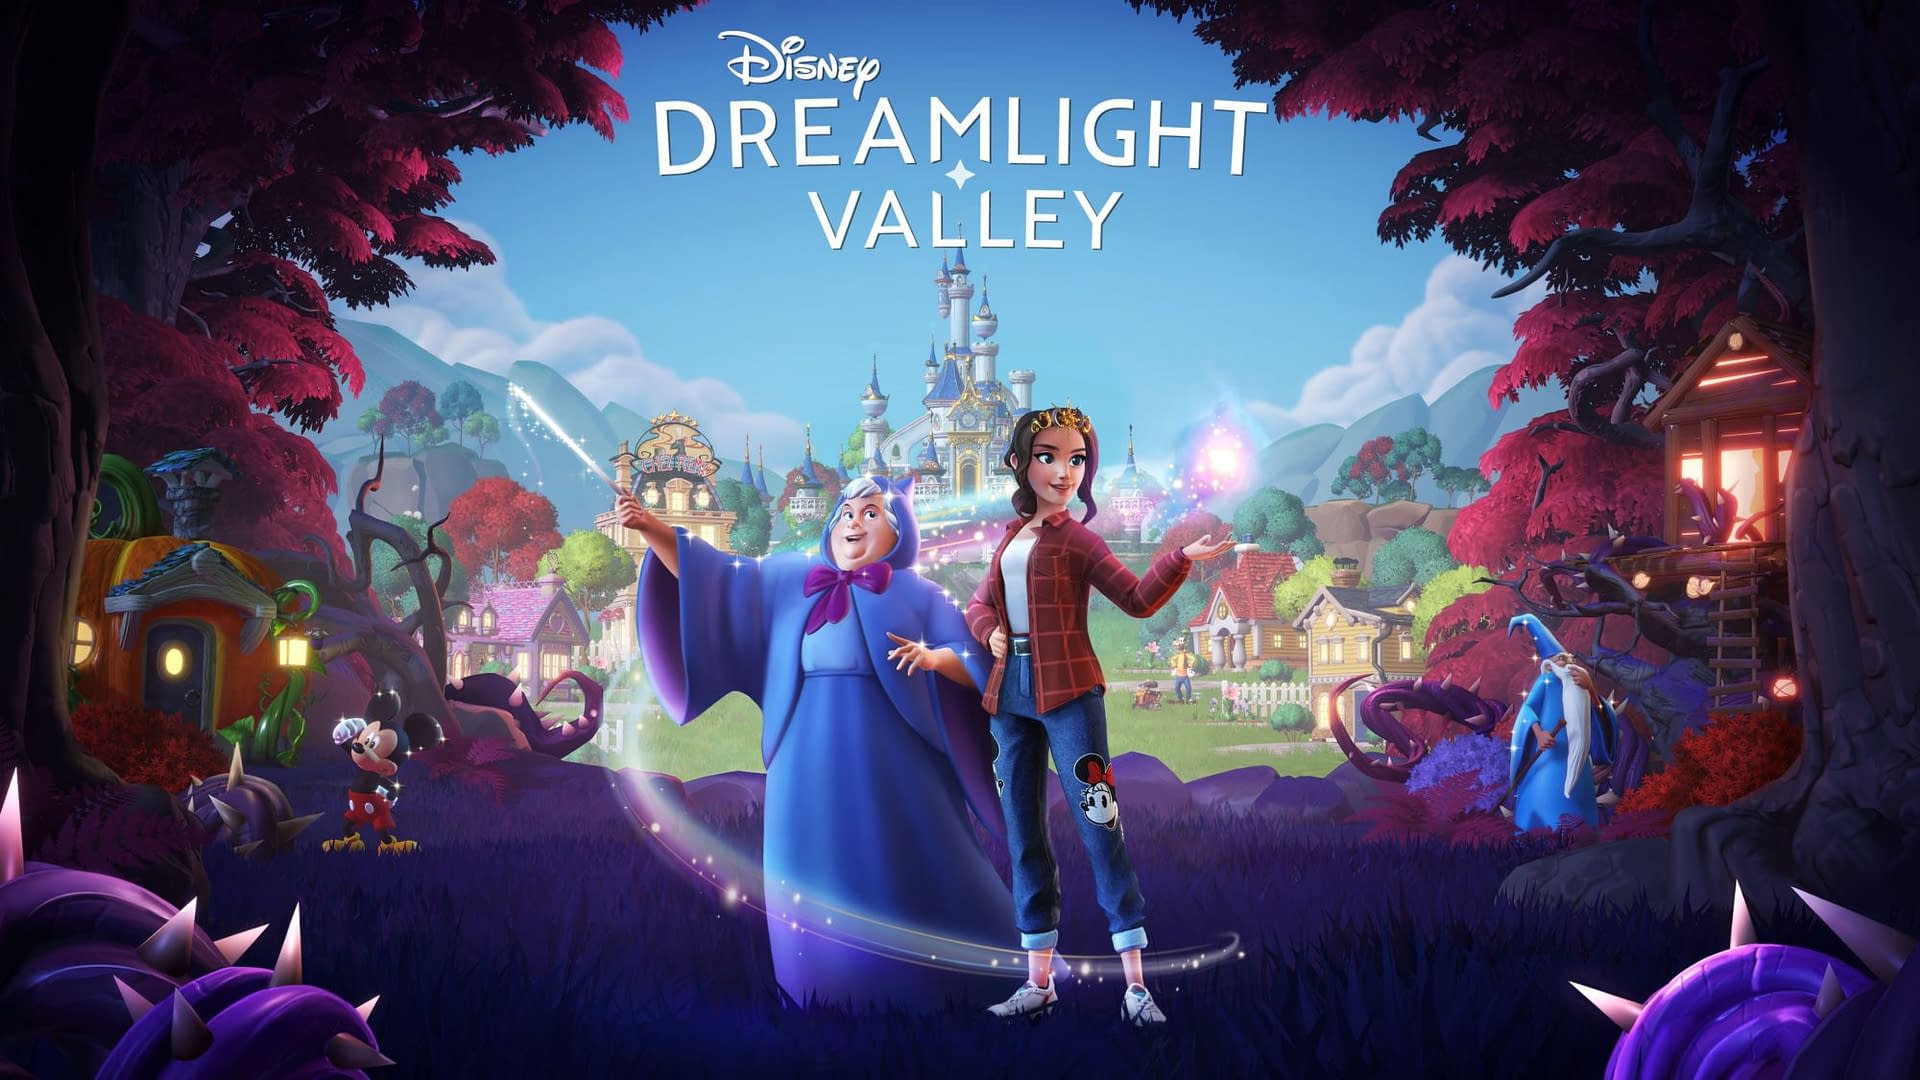 Disney Dreamlight Valley Early Access Review